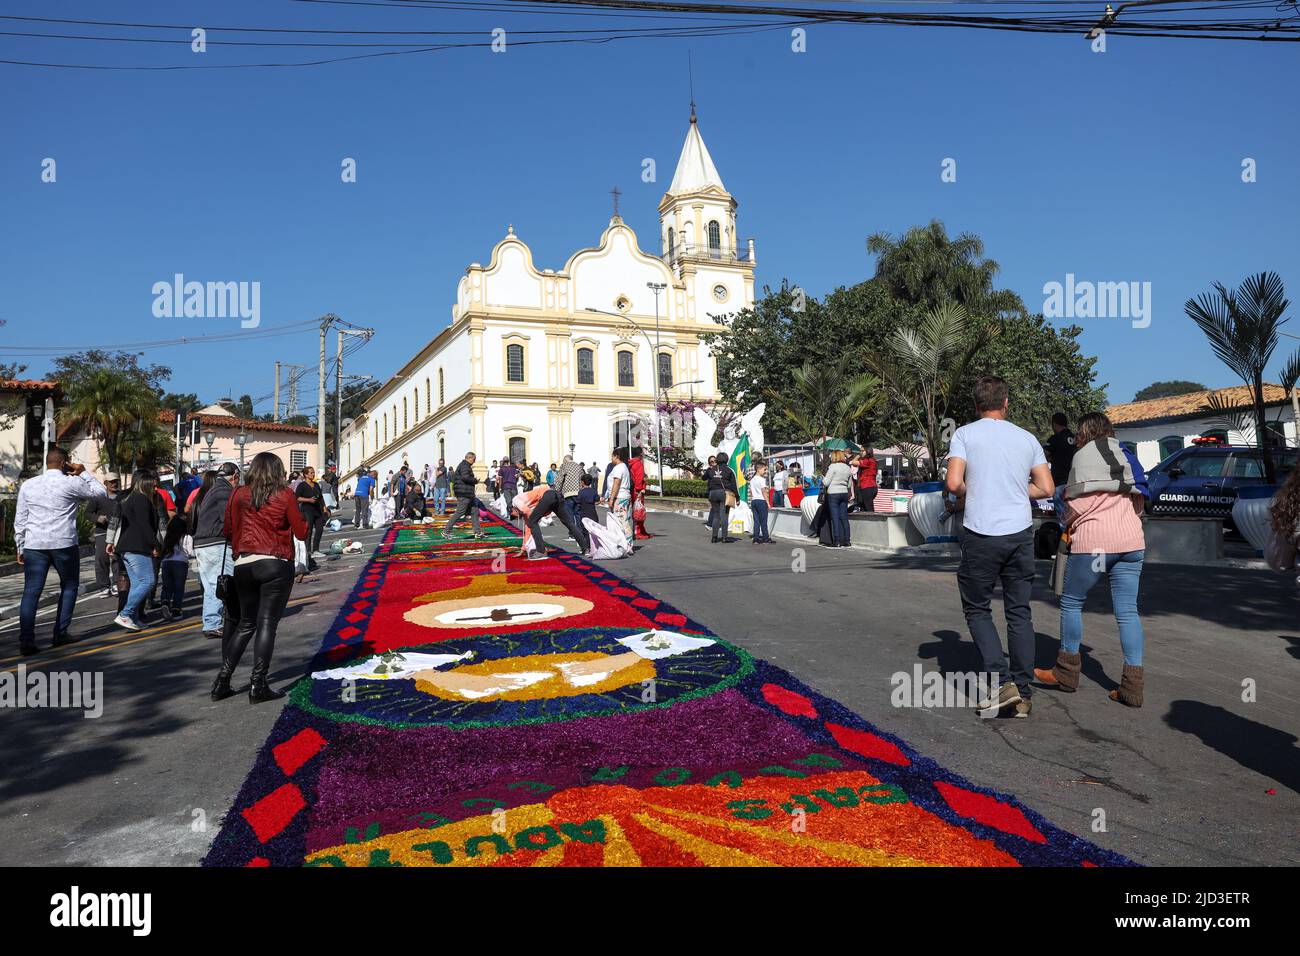 Brazil. 16th June, 2022. Movement of tourists during the traditional assembly of the sawdust mat with images linked to the Catholic church that celebrates the Corpus Christi holiday in the city of Santana de Paranaíba, this Thursday, 16th. (Photo: Vanessa Carvalho/Brazil Photo Press) Credit: Brazil Photo Press/Alamy Live News Credit: Brazil Photo Press/Alamy Live News Stock Photo